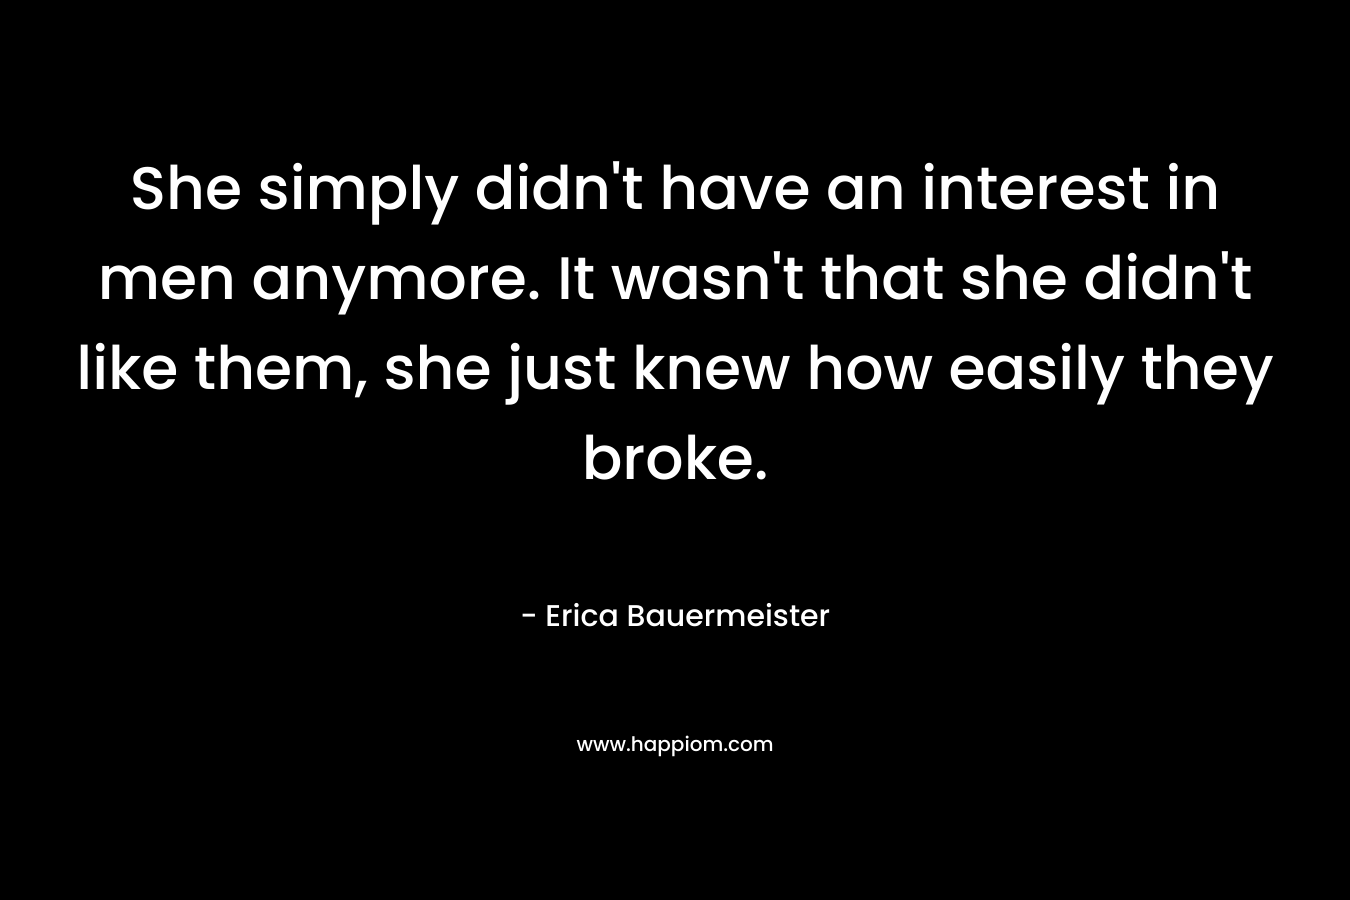 She simply didn’t have an interest in men anymore. It wasn’t that she didn’t like them, she just knew how easily they broke. – Erica Bauermeister